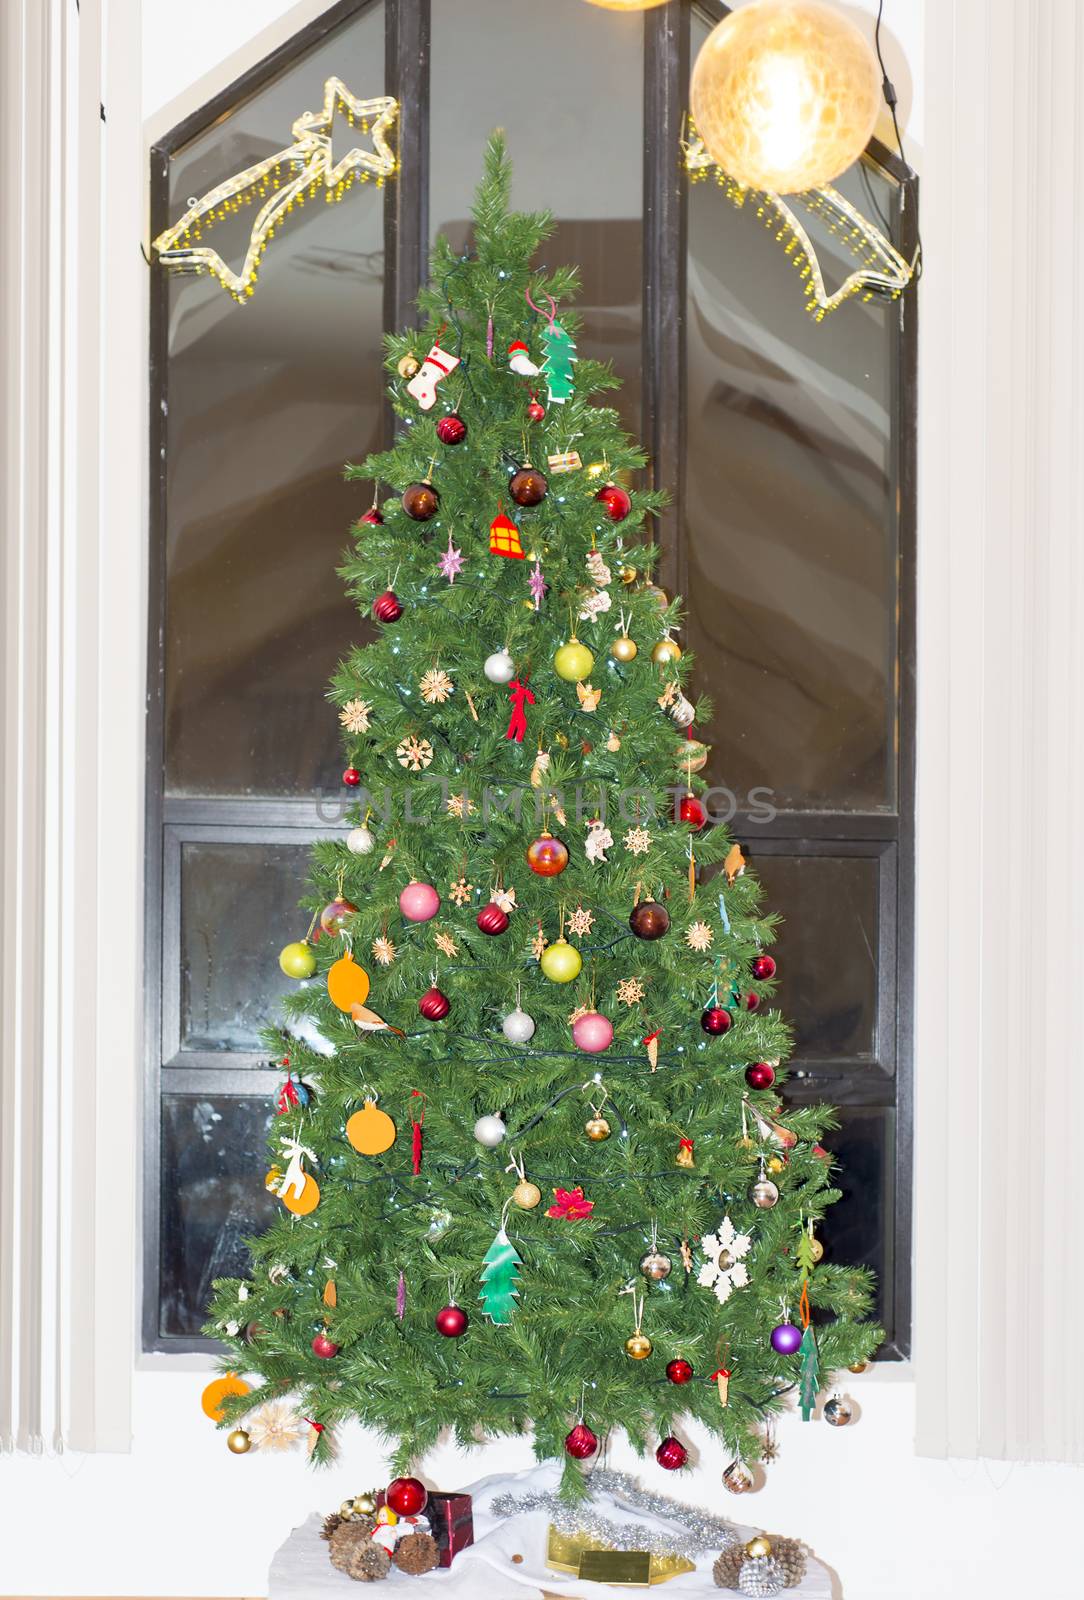 Christmas tree presents and decorations against a modern church window